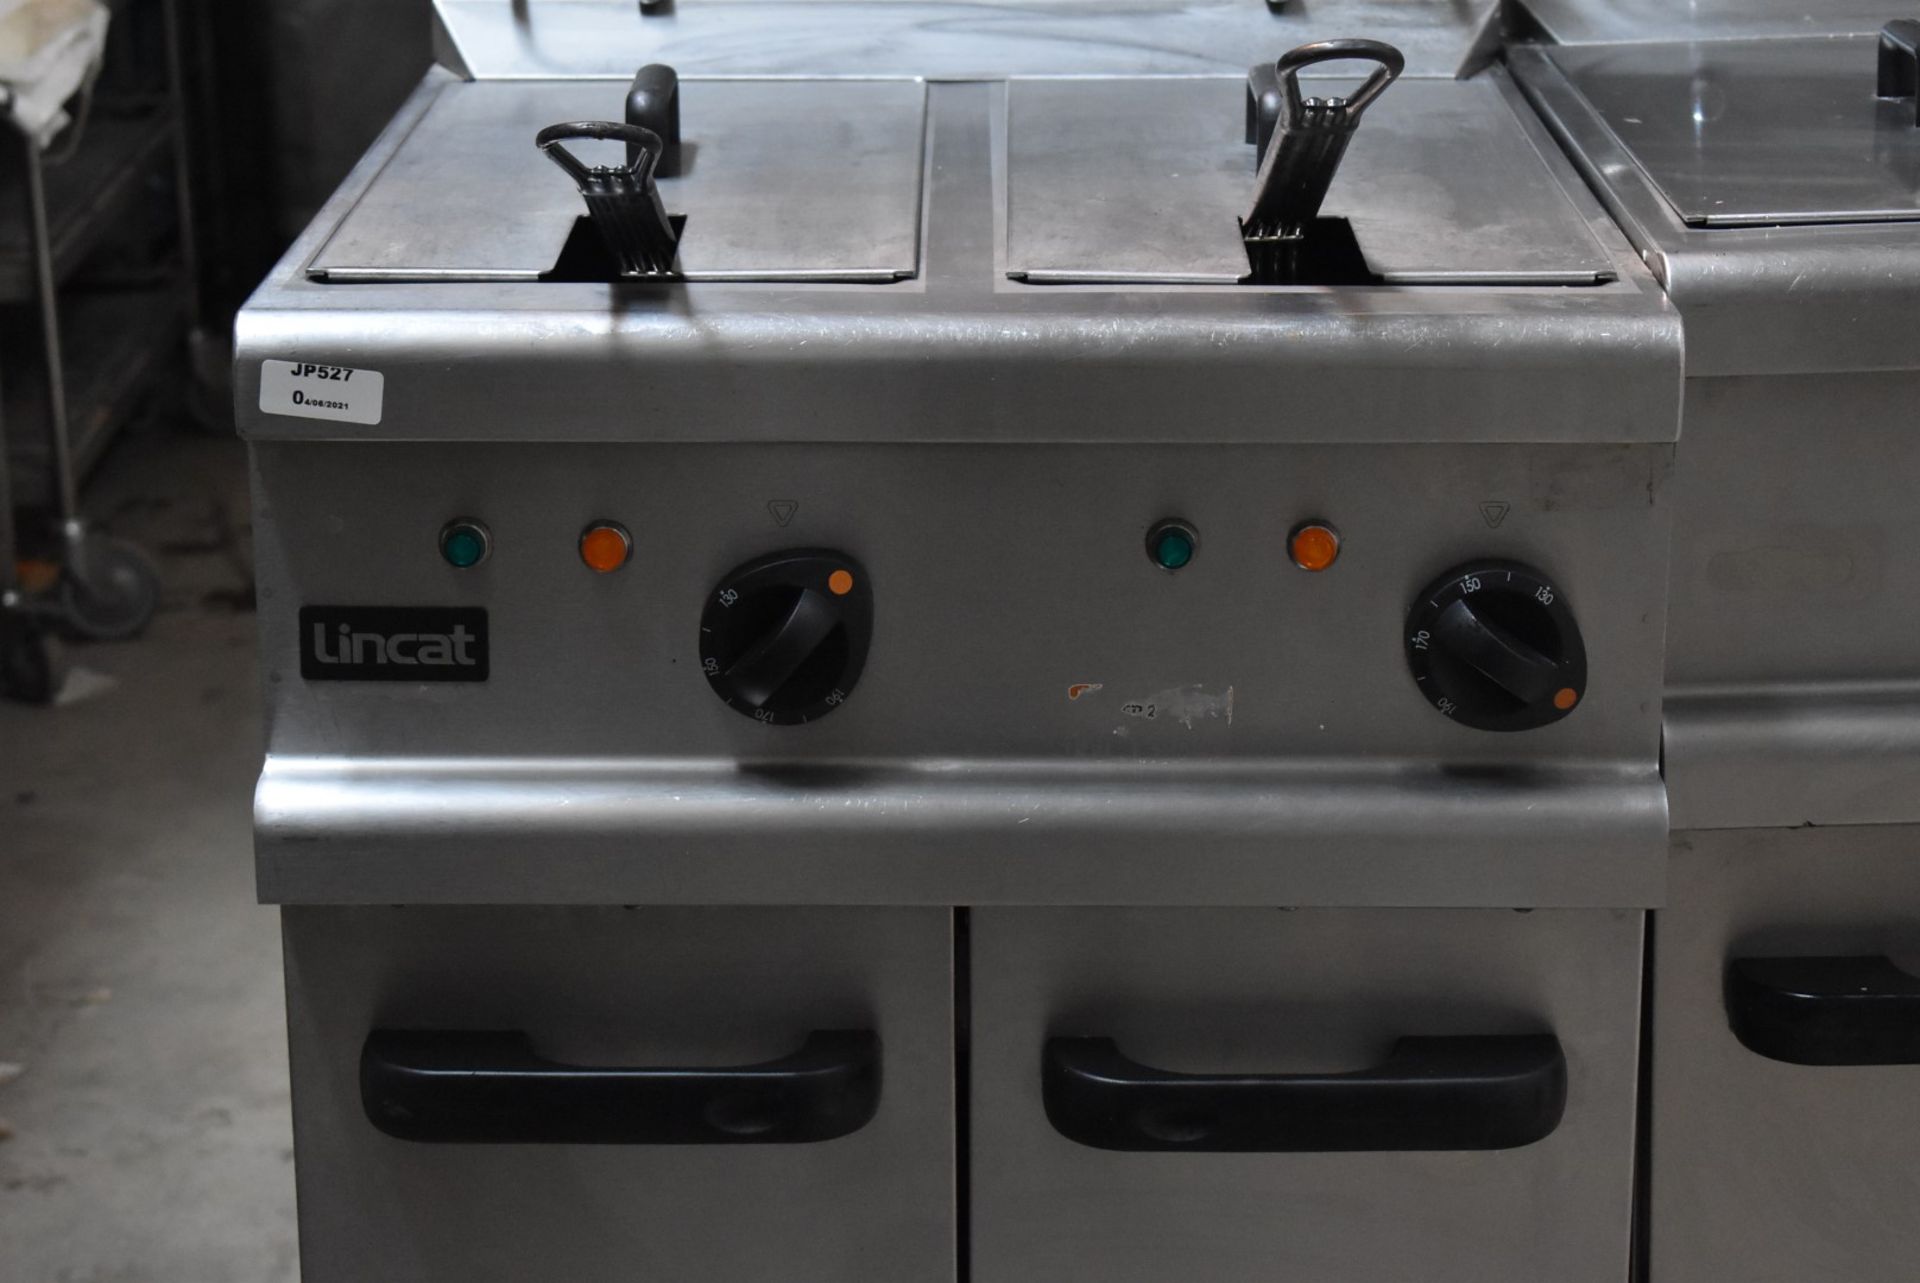 1 x Lincat Opus 700 OE7113 Single Large Tank Electric Fryer With Built In Filteration - 240V / 3PH - Image 5 of 14